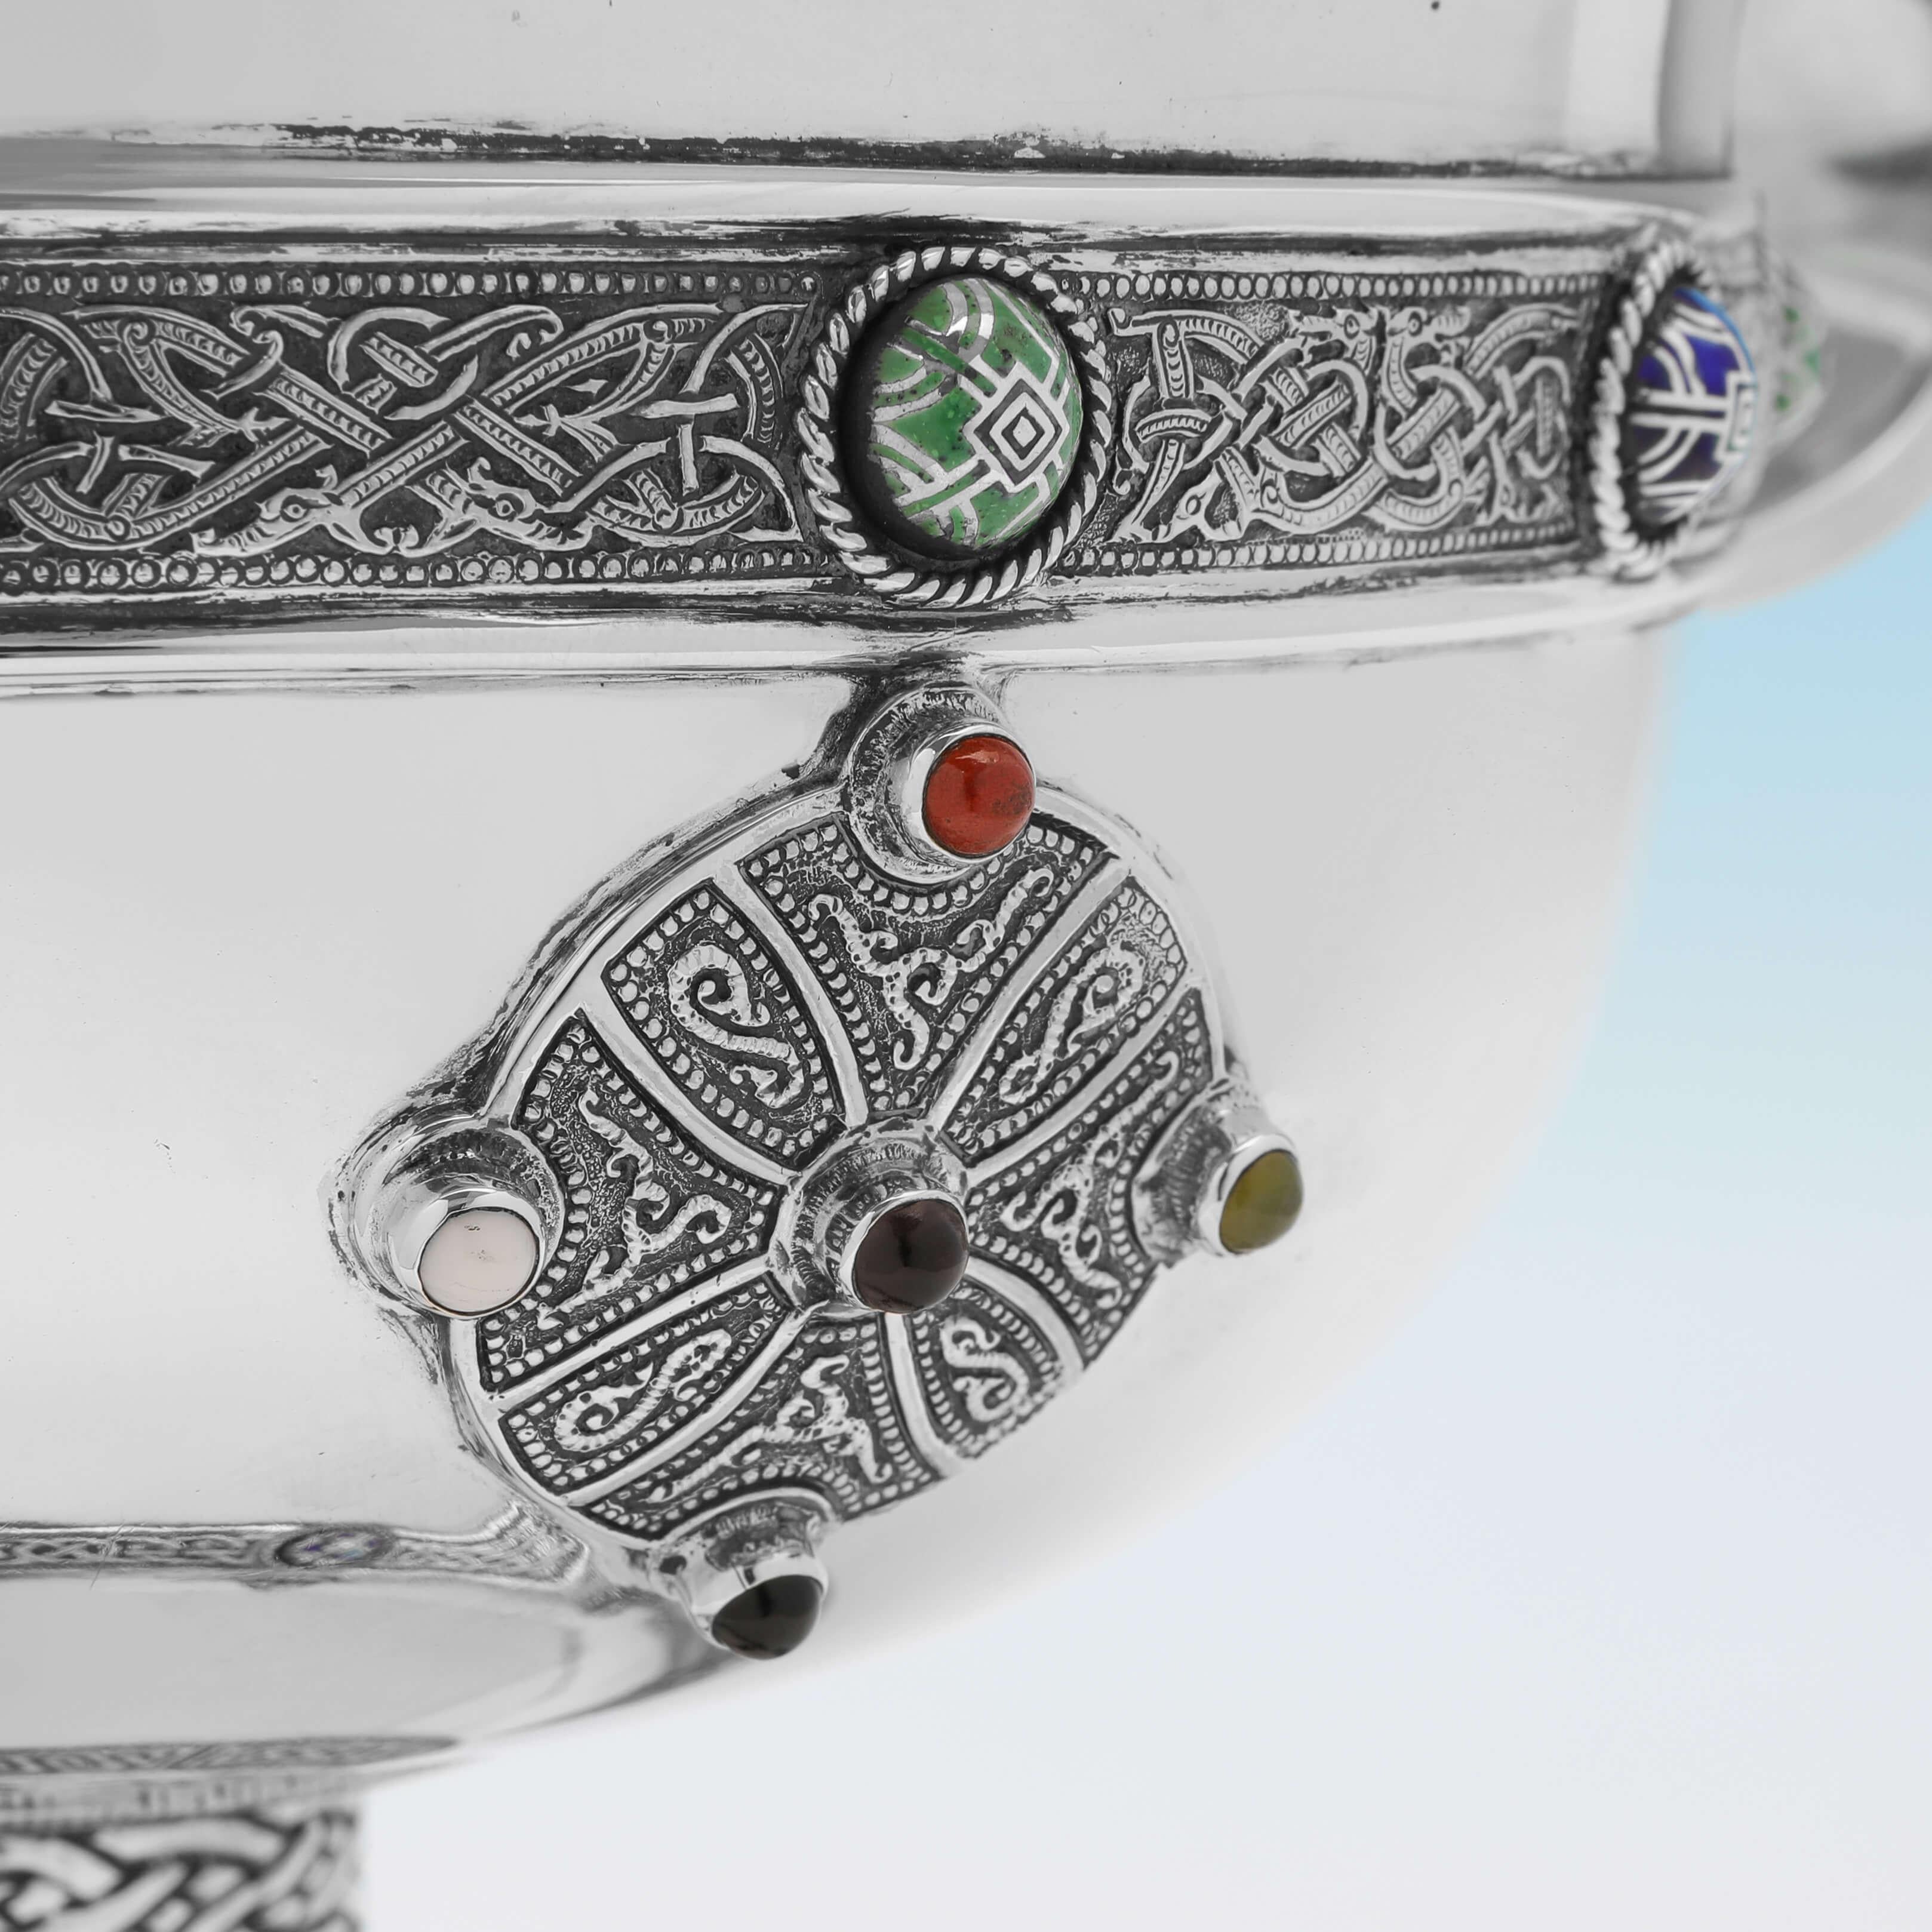 Ardagh Chalice, an Antique Sterling Silver and Enamel Replica Dublin 1914 In Good Condition For Sale In London, London